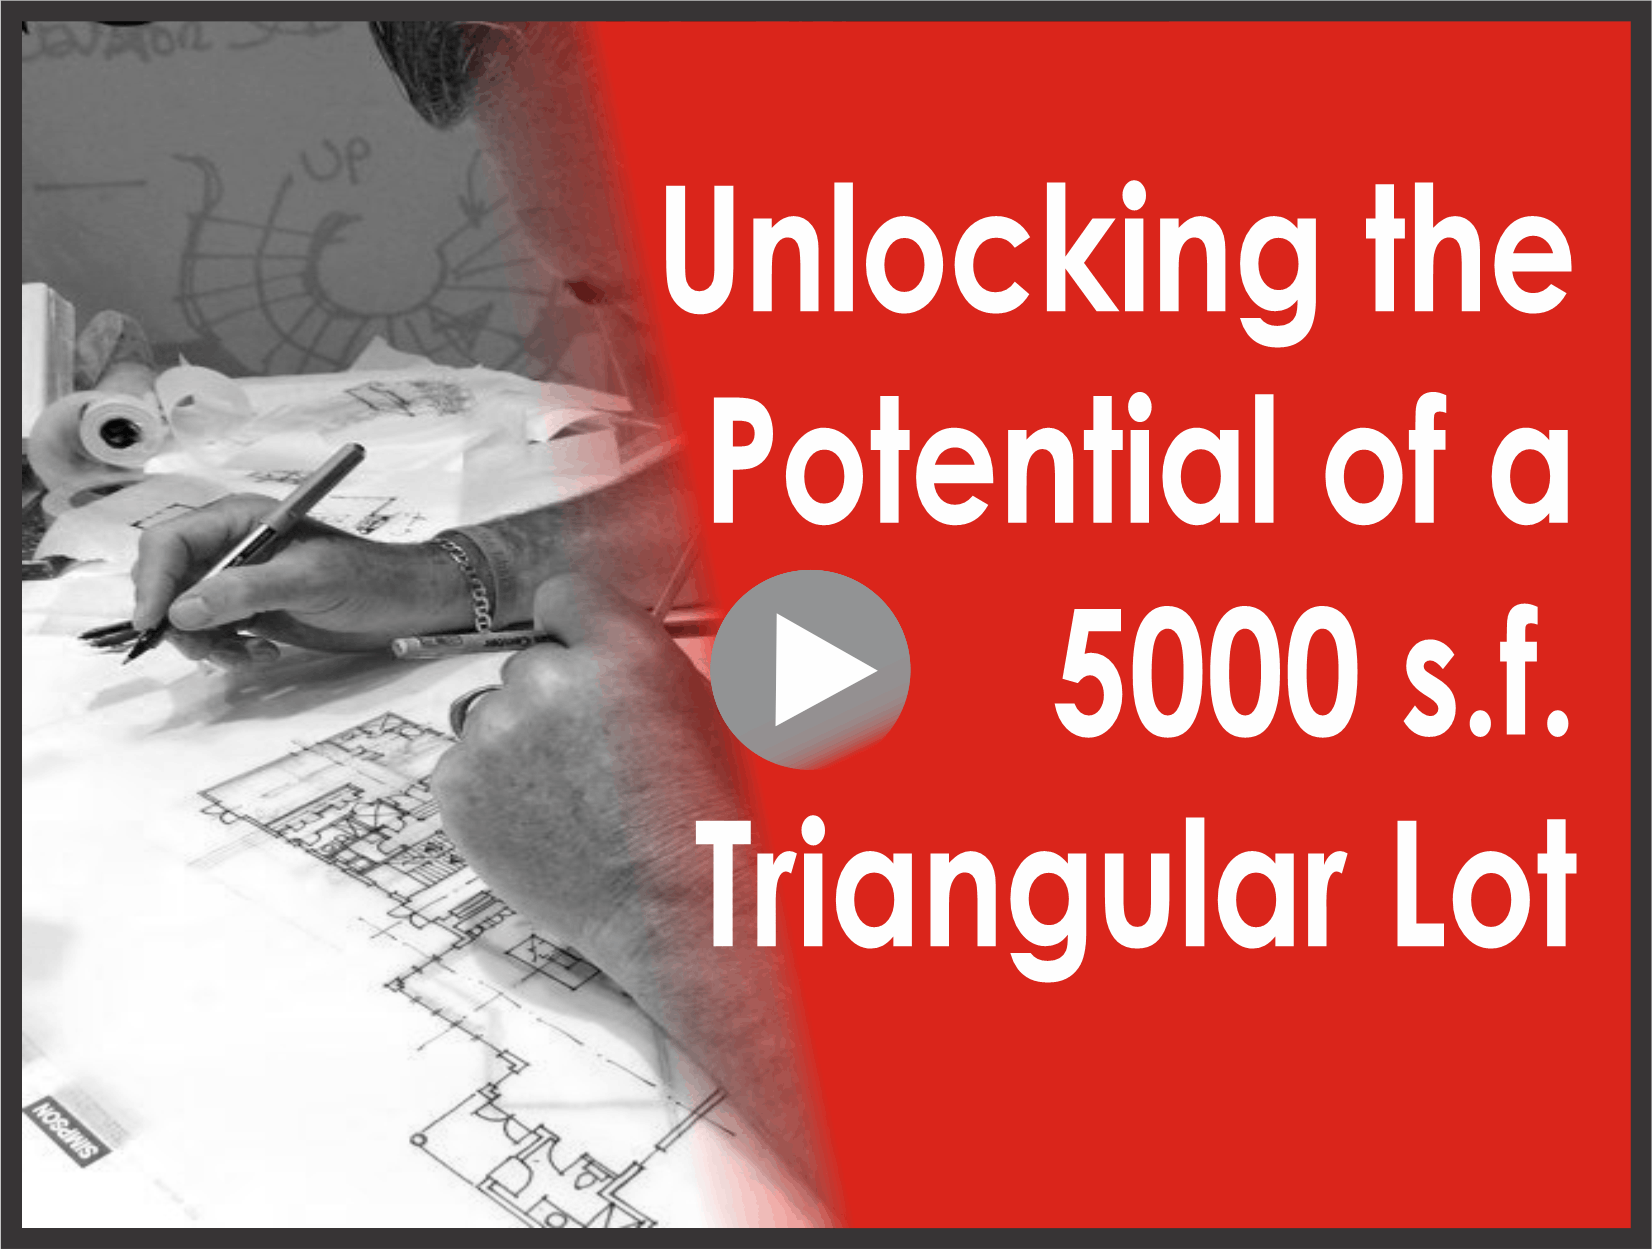 Unlocking the potential of a 5000 s.f. triangular lot.